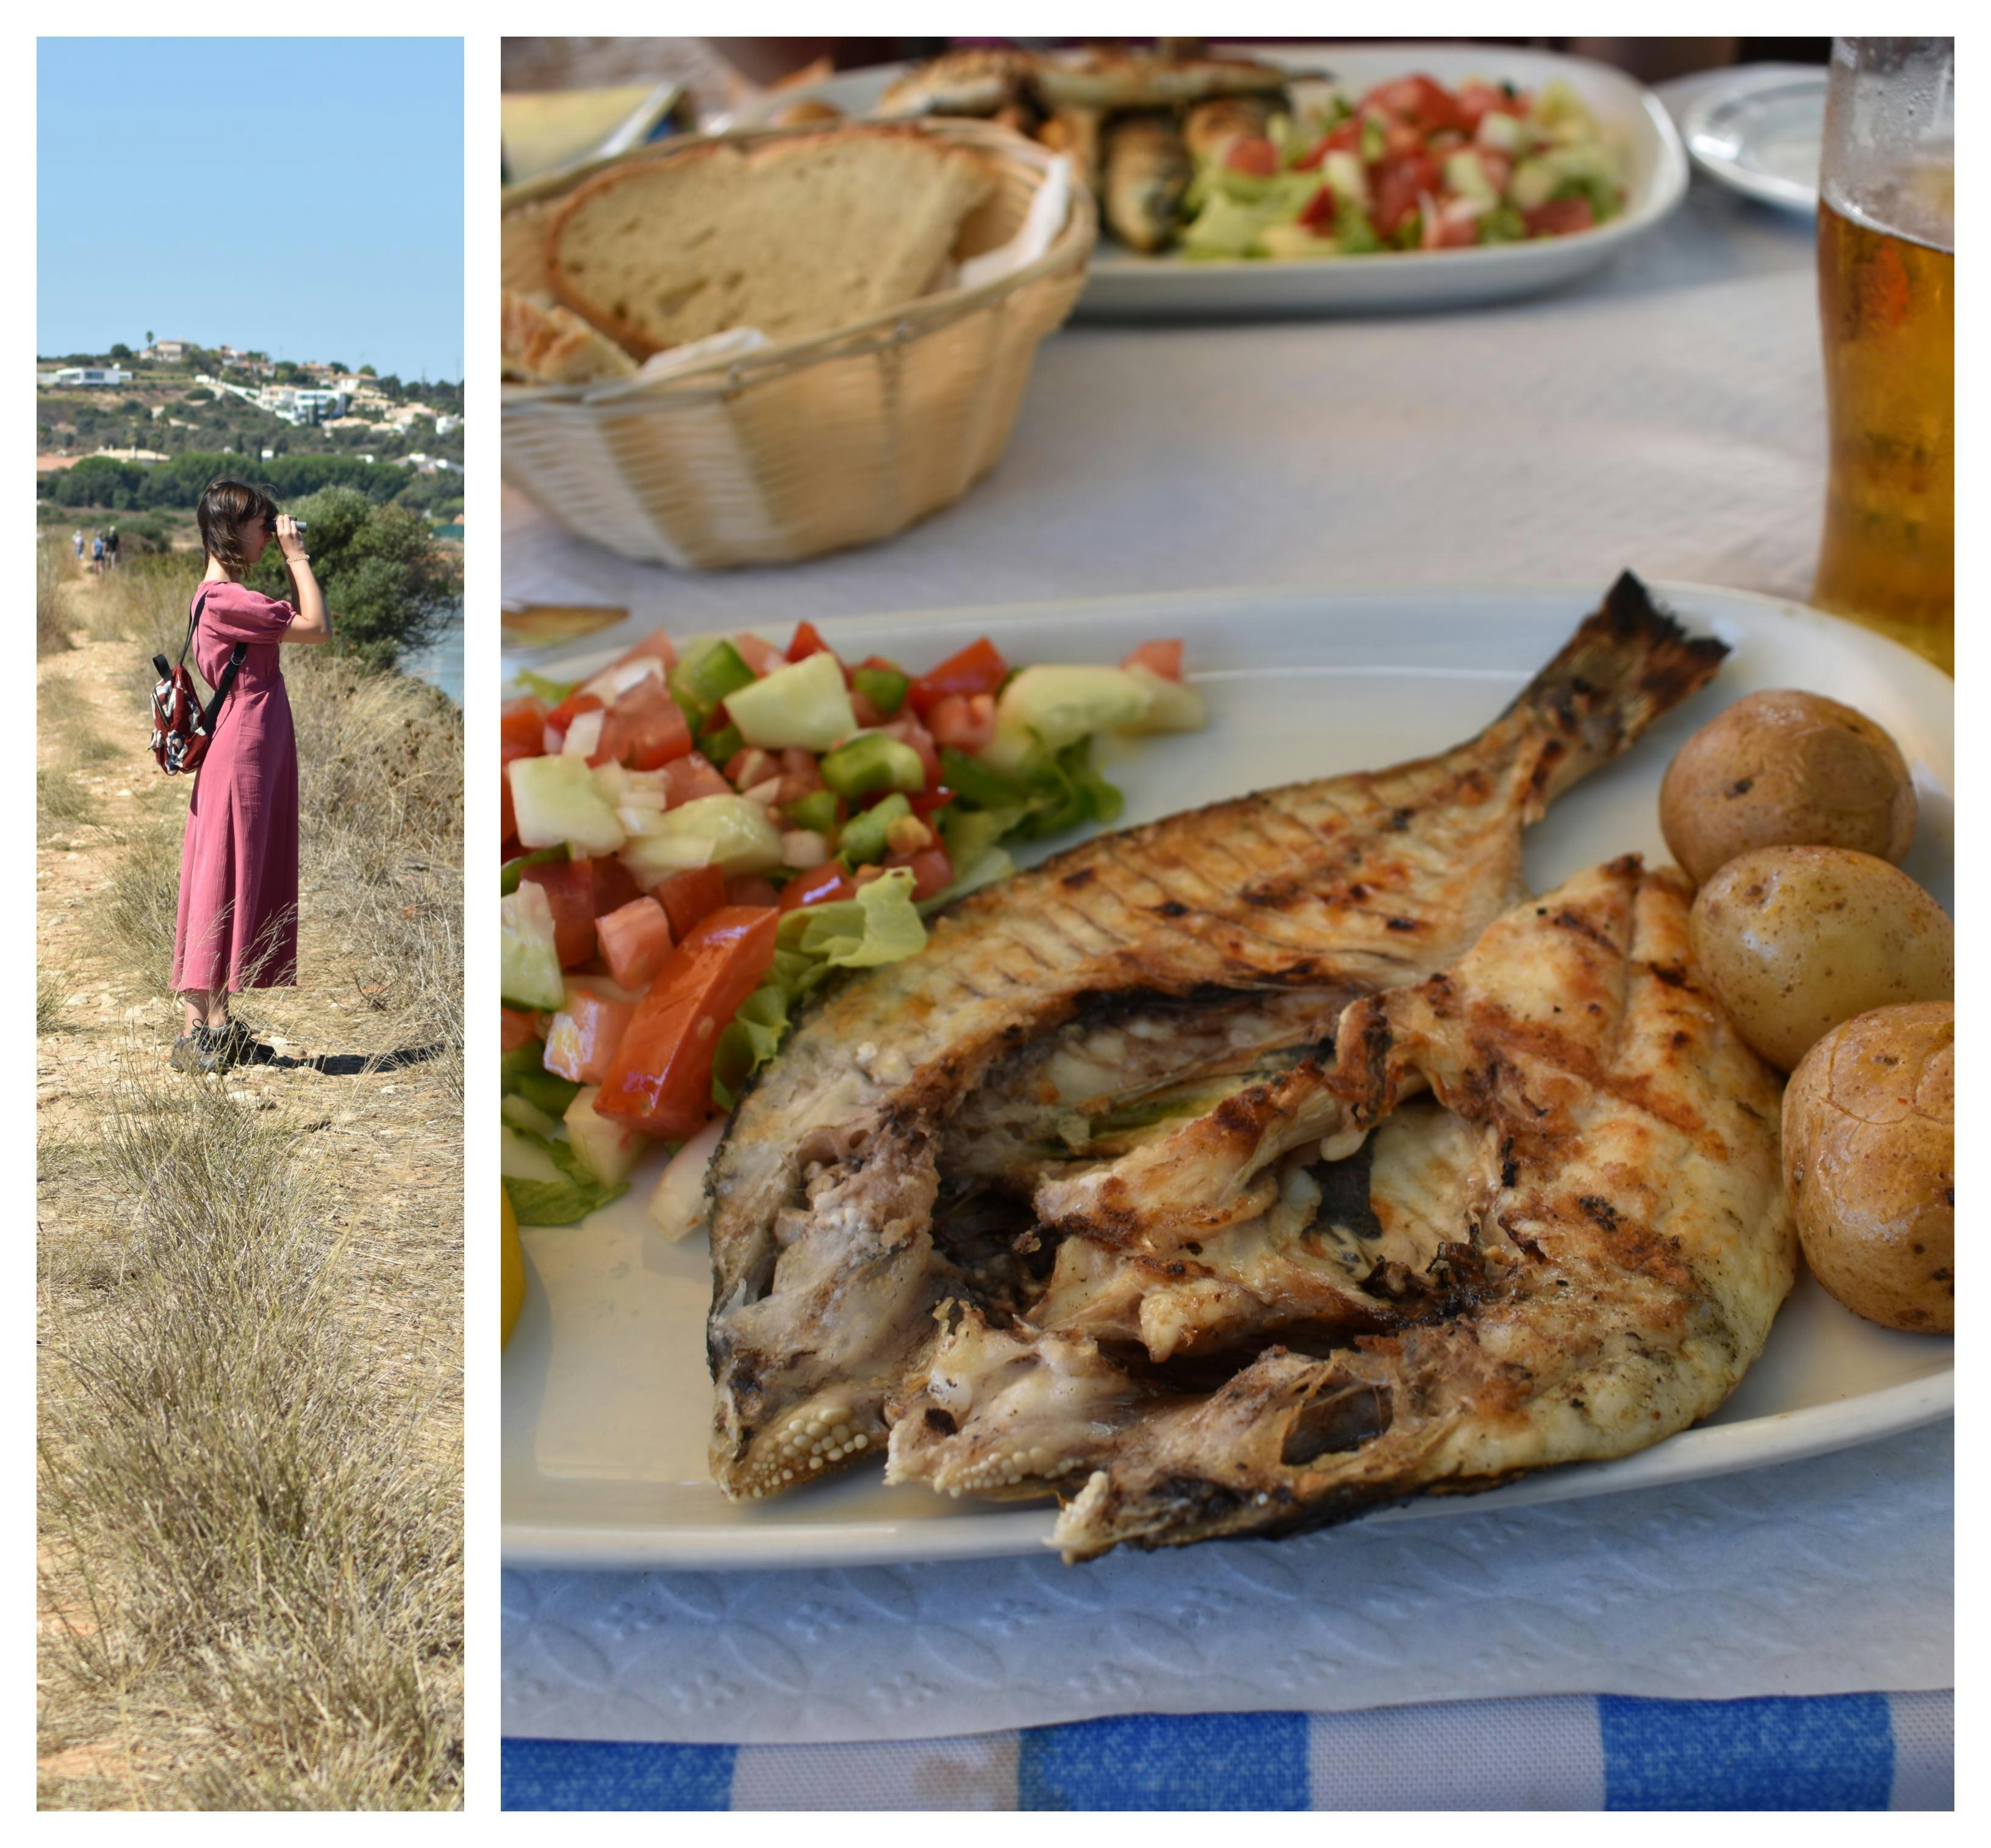 On the left a woman holds binoculars up to her face. On the right, a close up of grilled fish, potatoes and salad